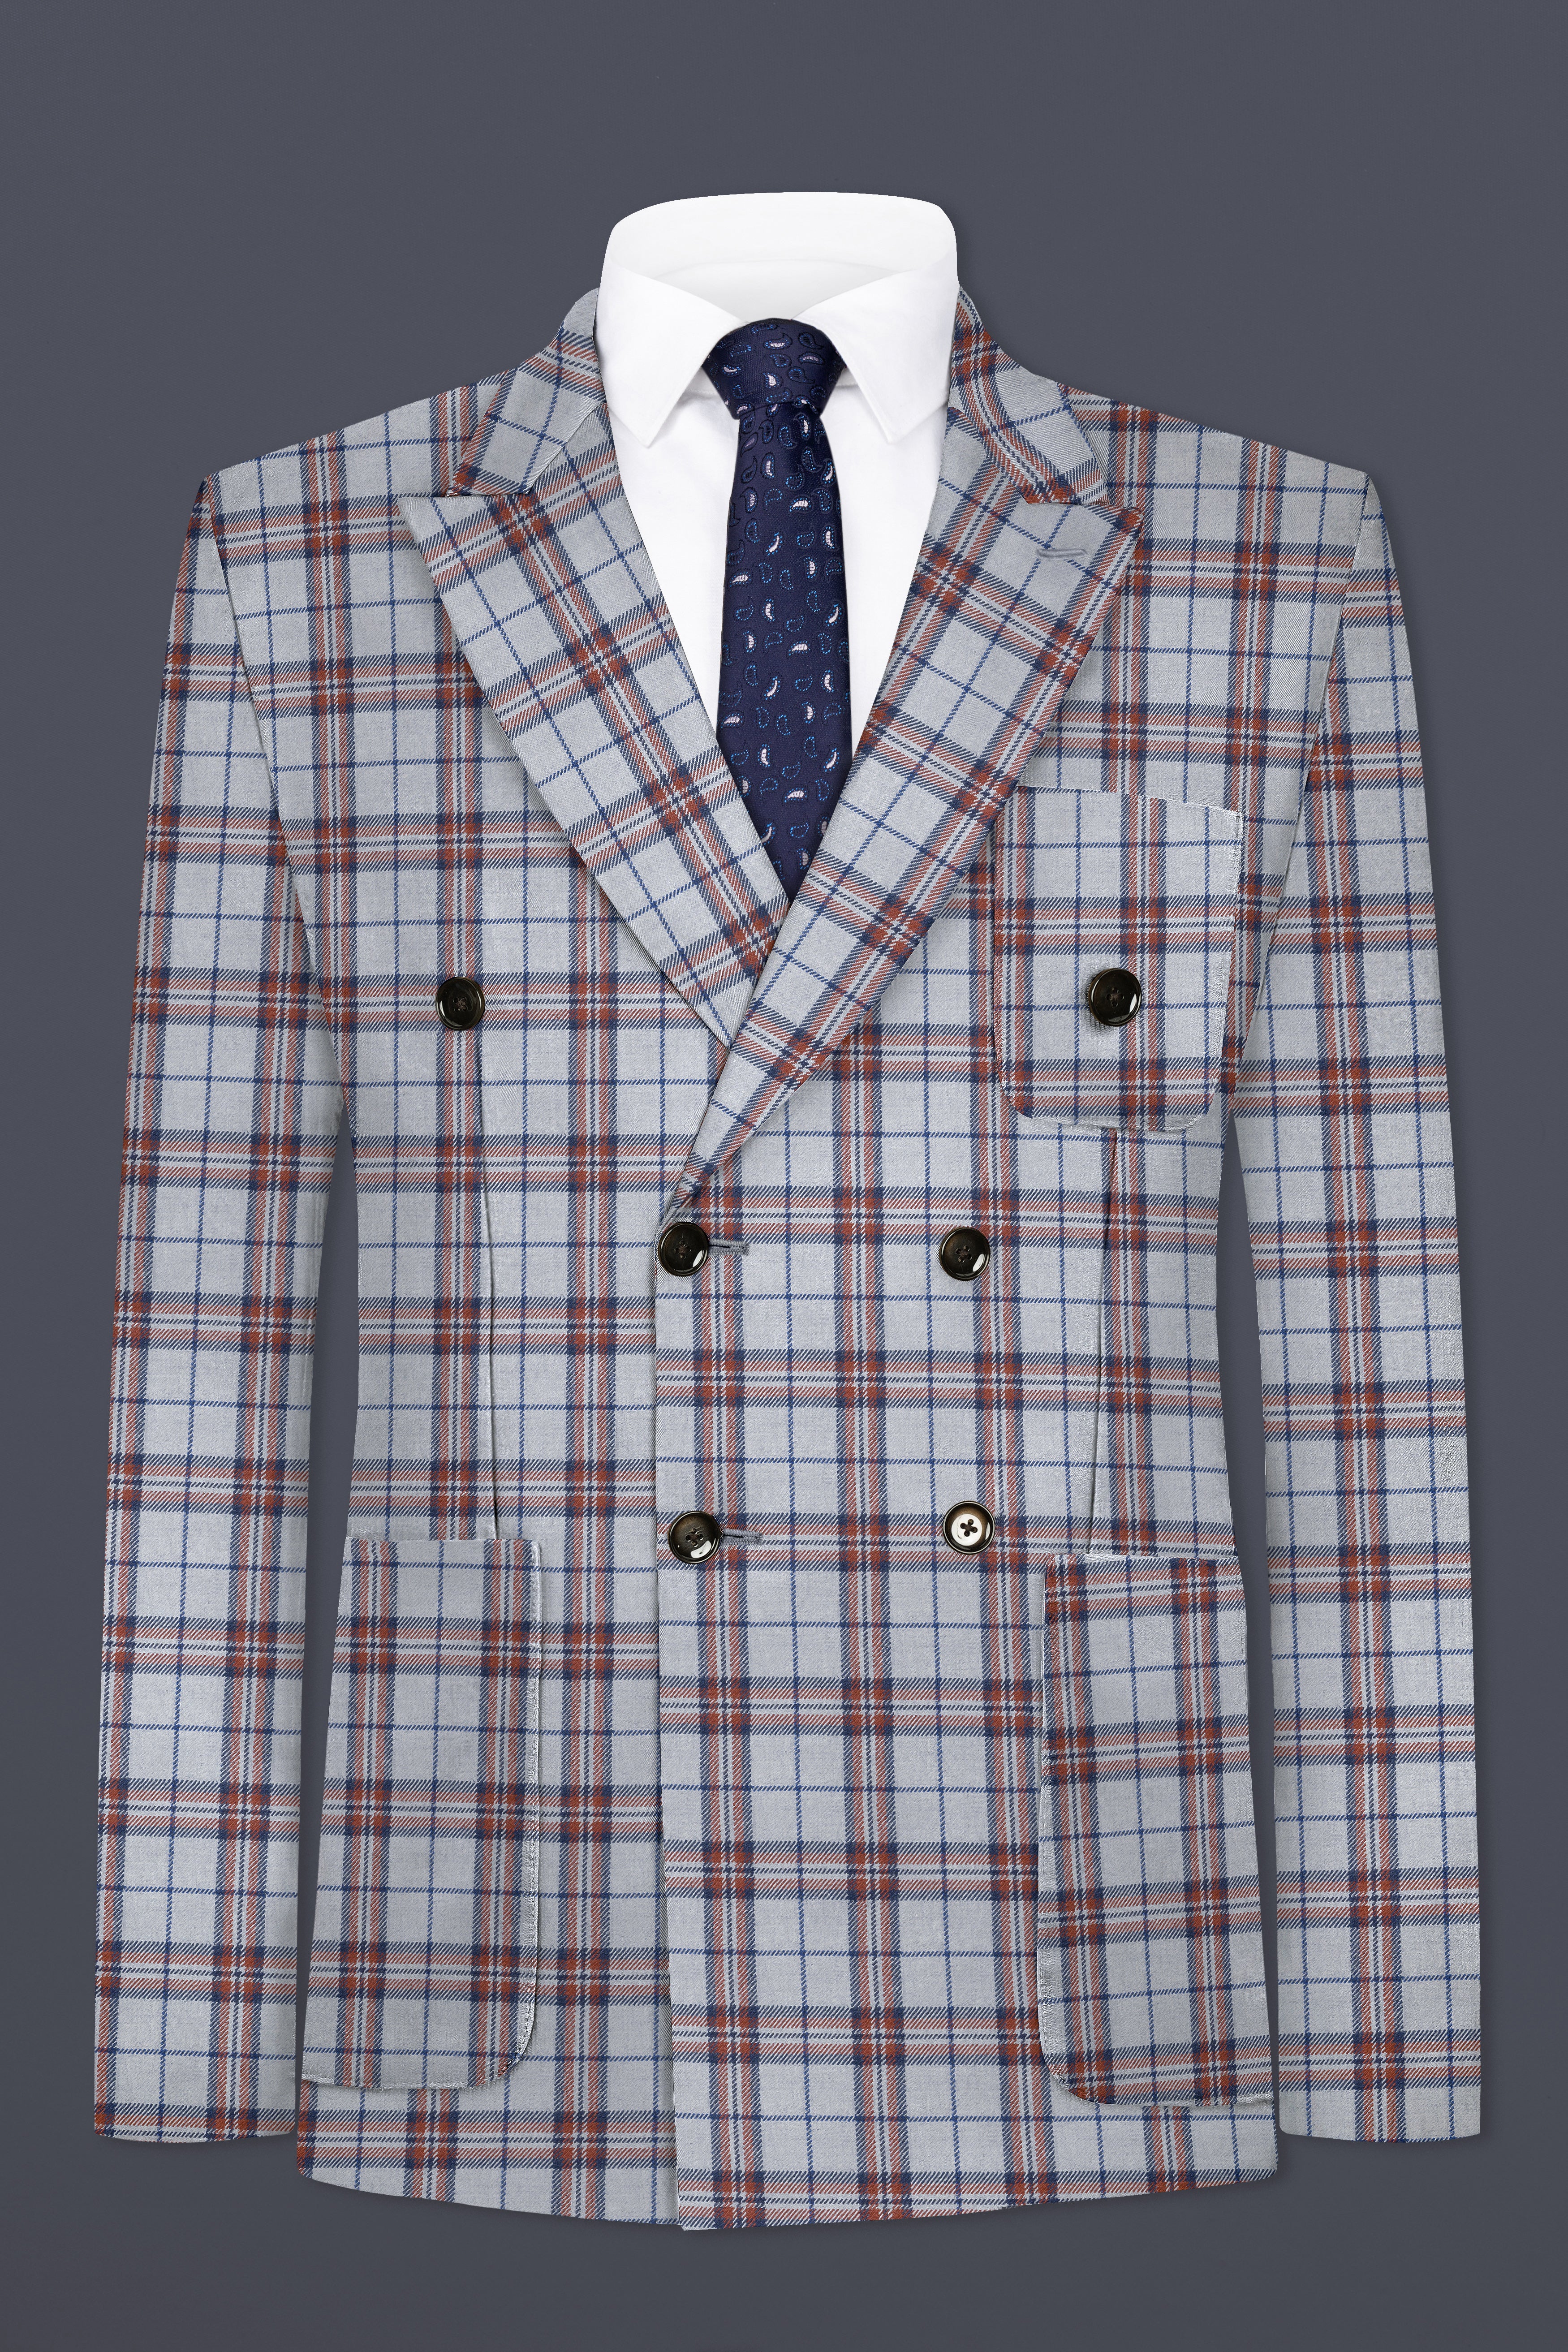 Cadet Grey with Maroon and Blue Plaid Double Breasted Tweed Blazer